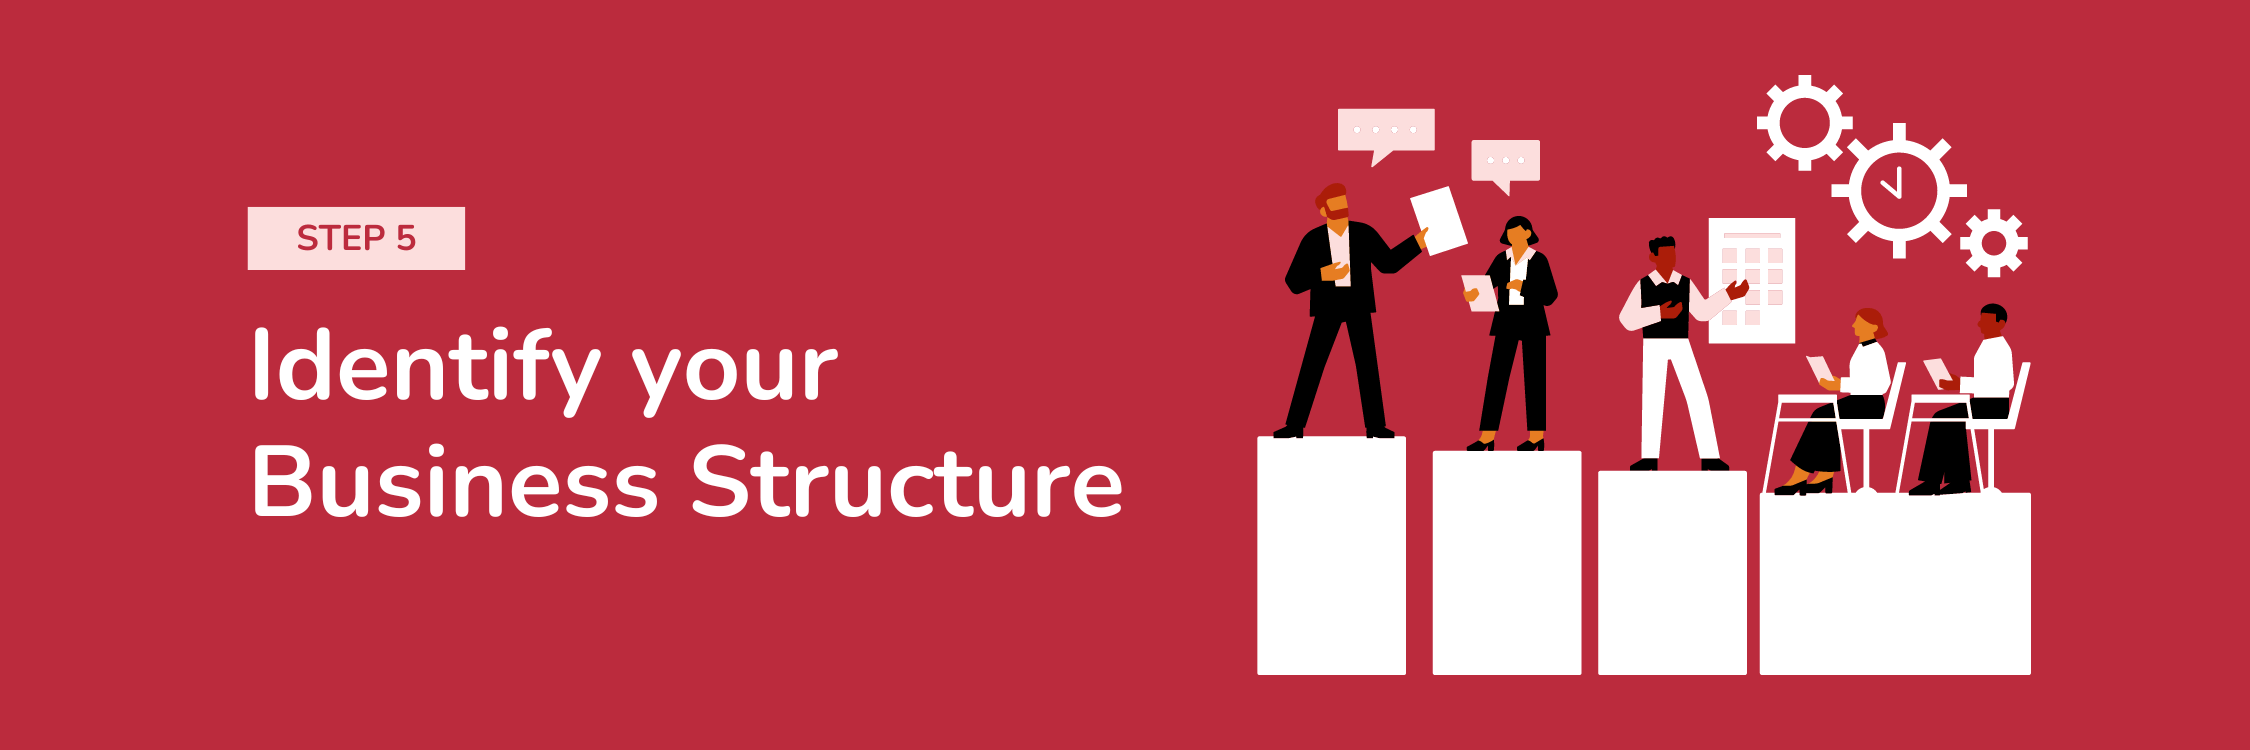 Step 5: Identify Your Business Structure